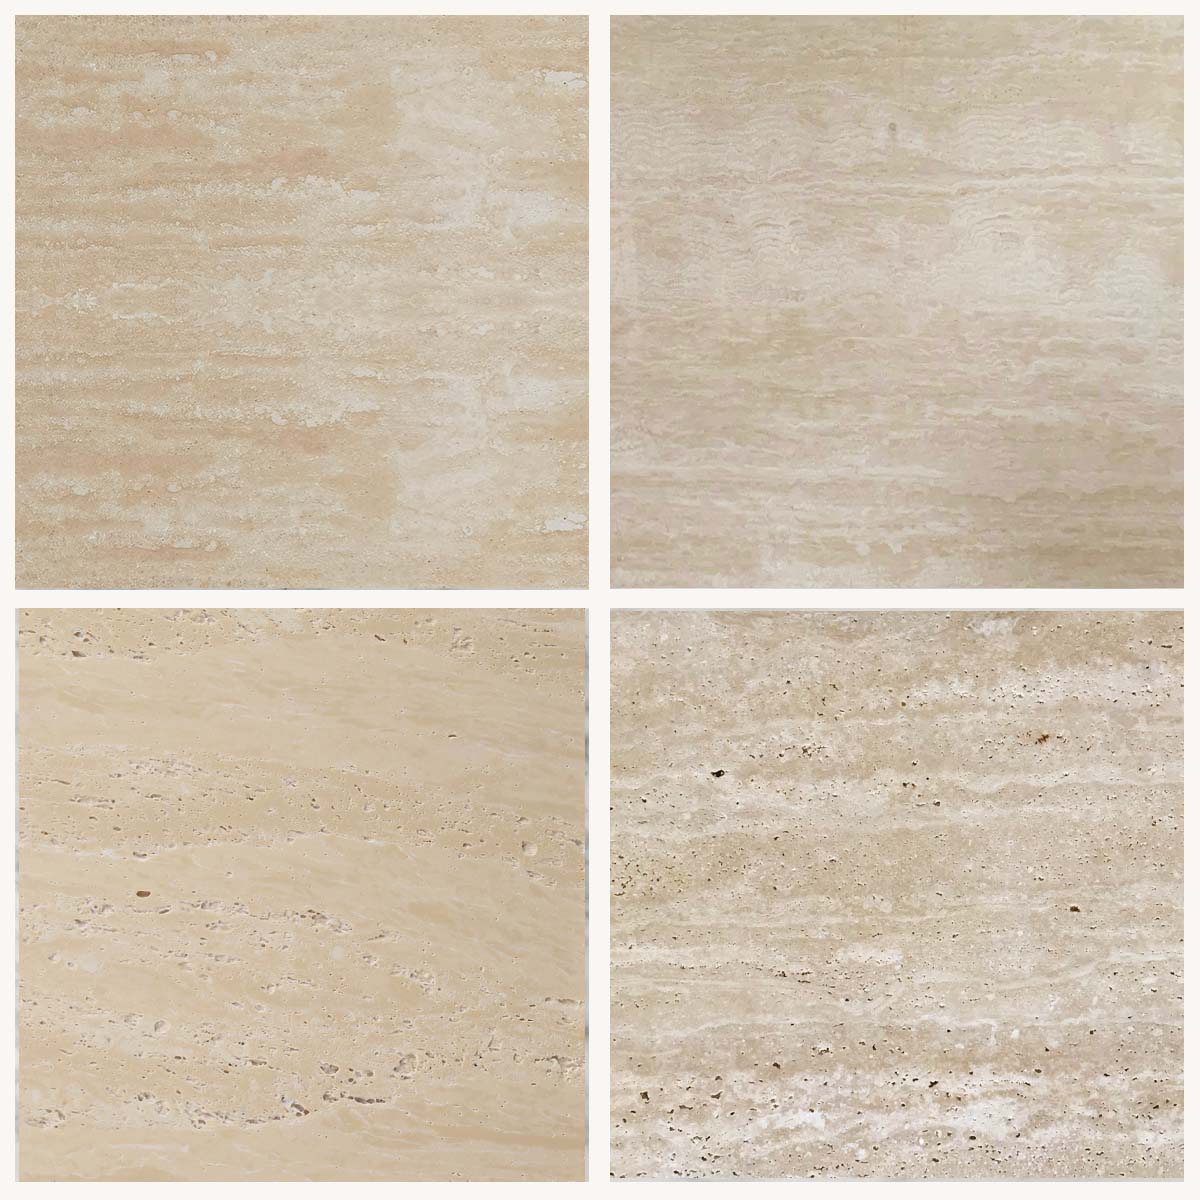 OIXDESIGN, Italian Classico Travertine, Comparison Photo, Showing Natural Character and Color Variation